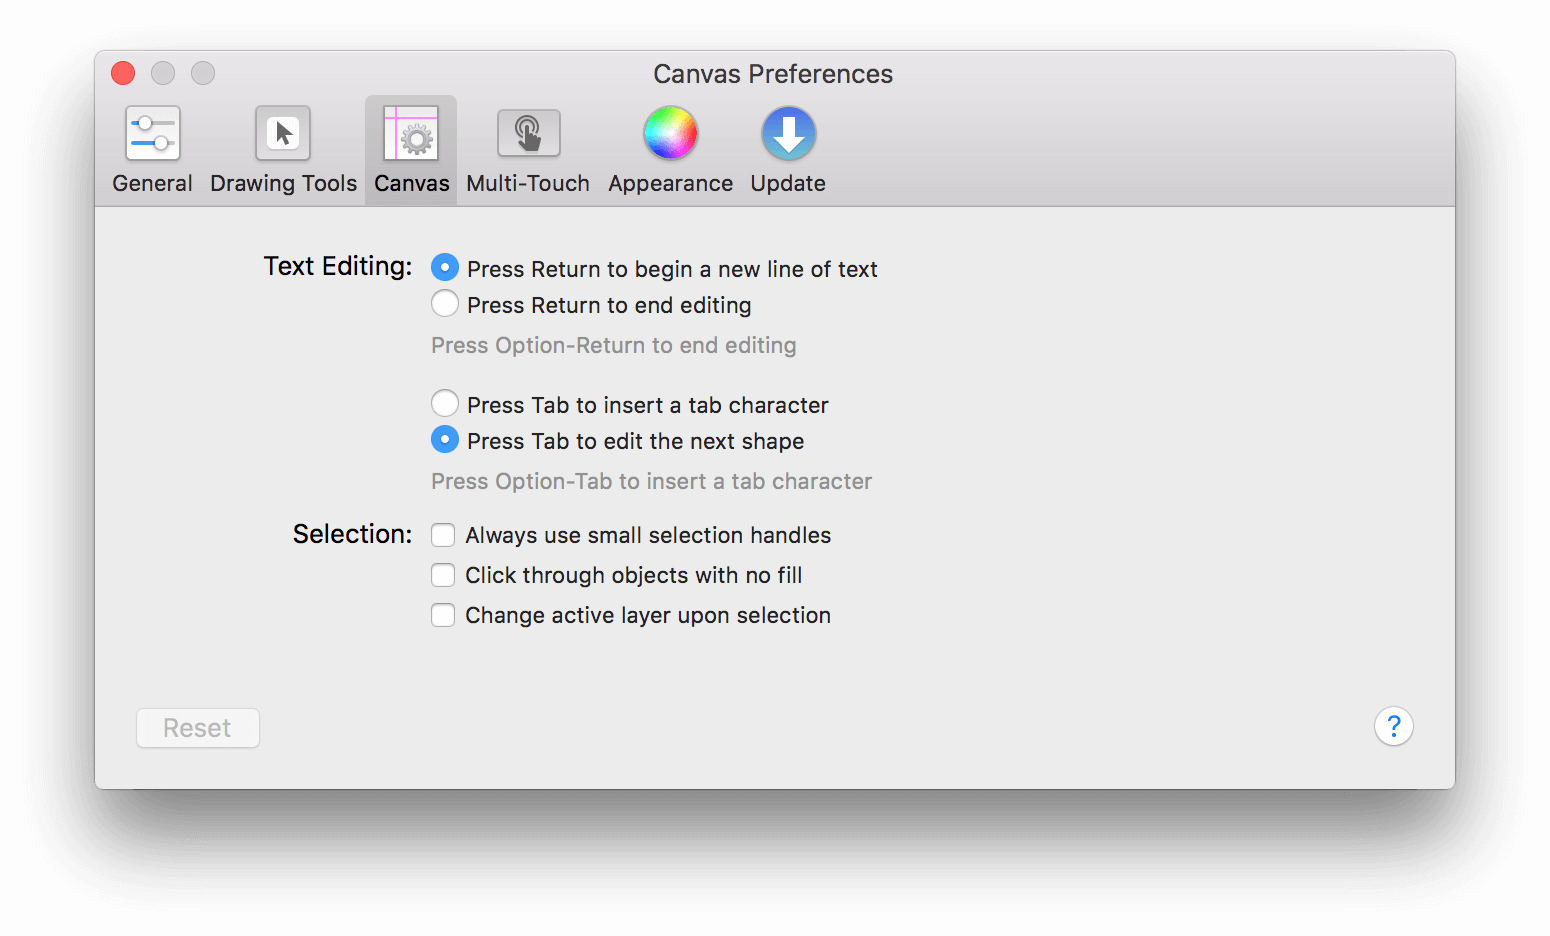 The Canvas Preferences panel